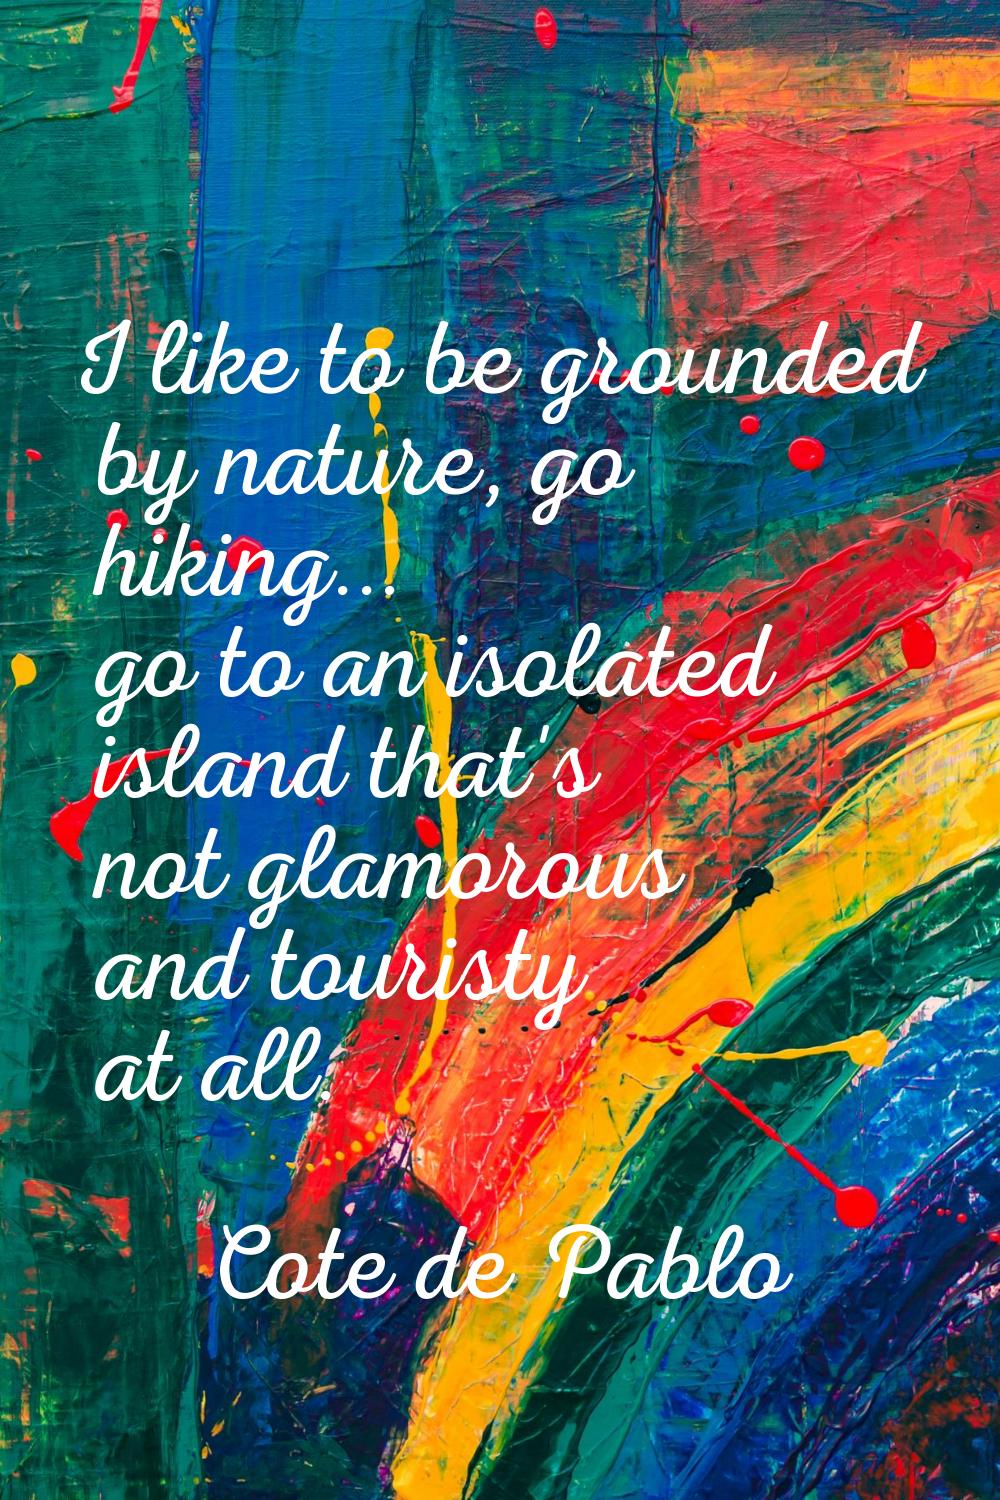 I like to be grounded by nature, go hiking... go to an isolated island that's not glamorous and tou